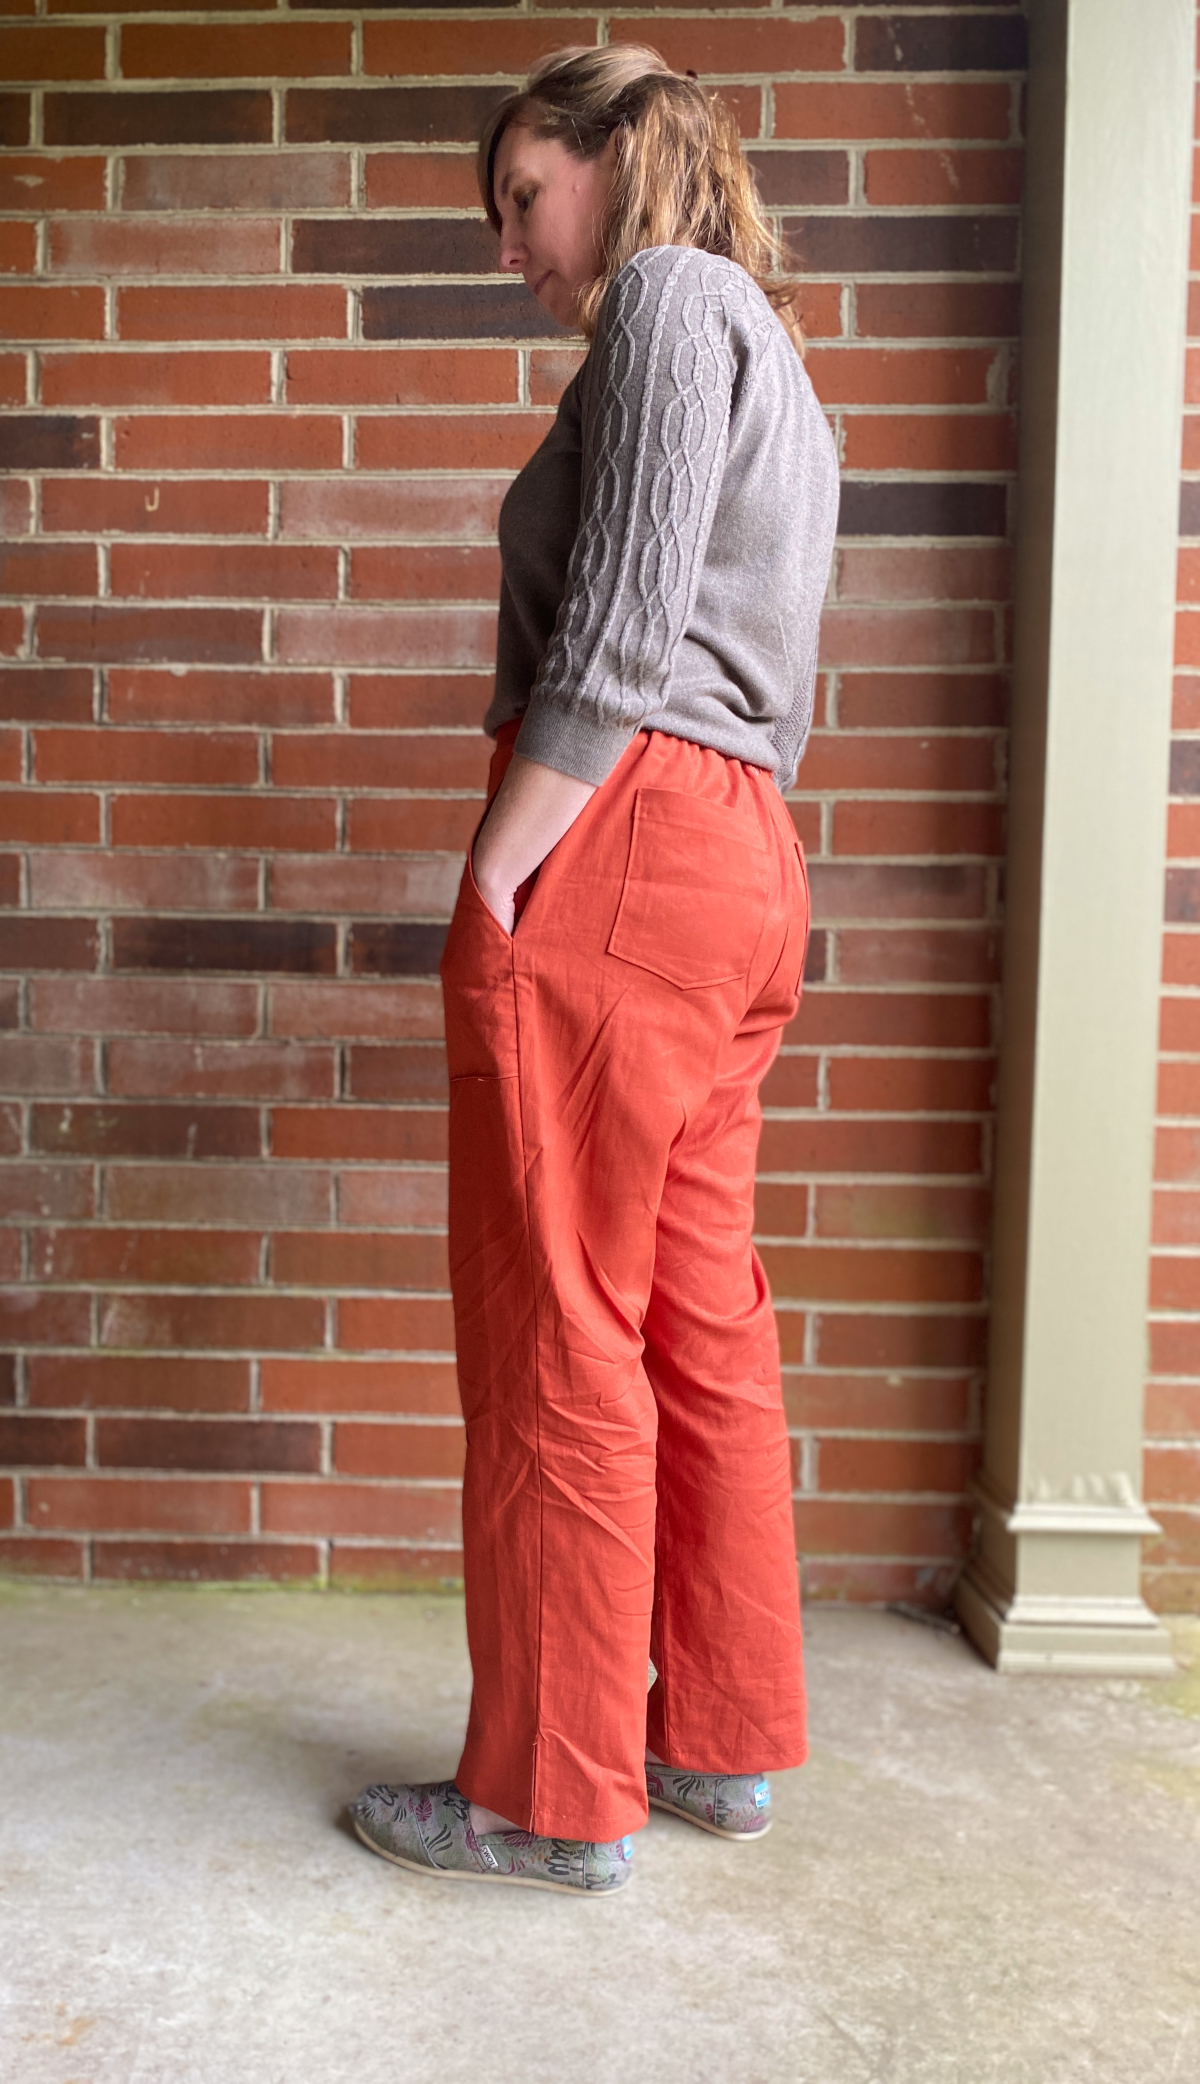 Sewing Patterns for Women Pants Flat Front, Elastic Back Waist